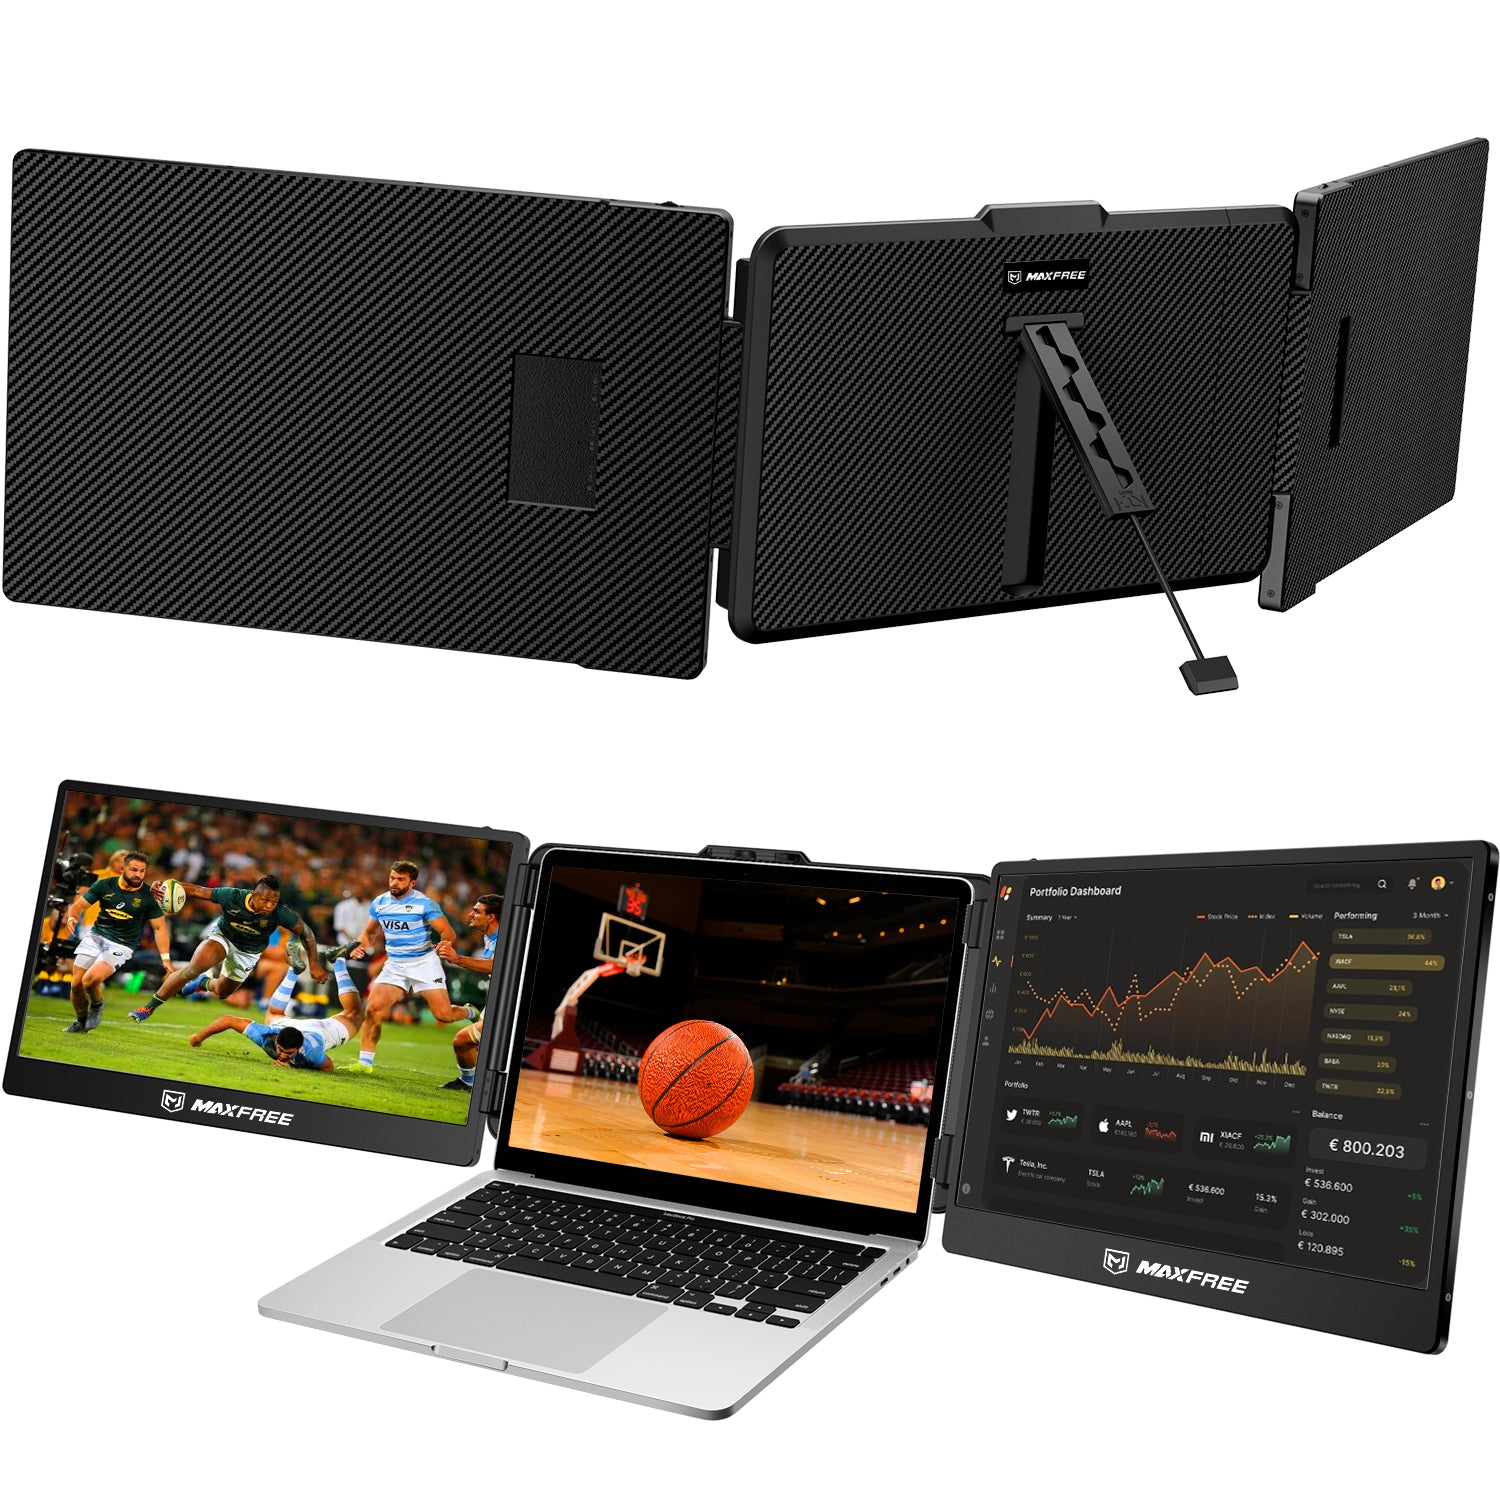 Kwumsy Triple Portable Monitor For Laptop-14Inch FHD 1080P Triple